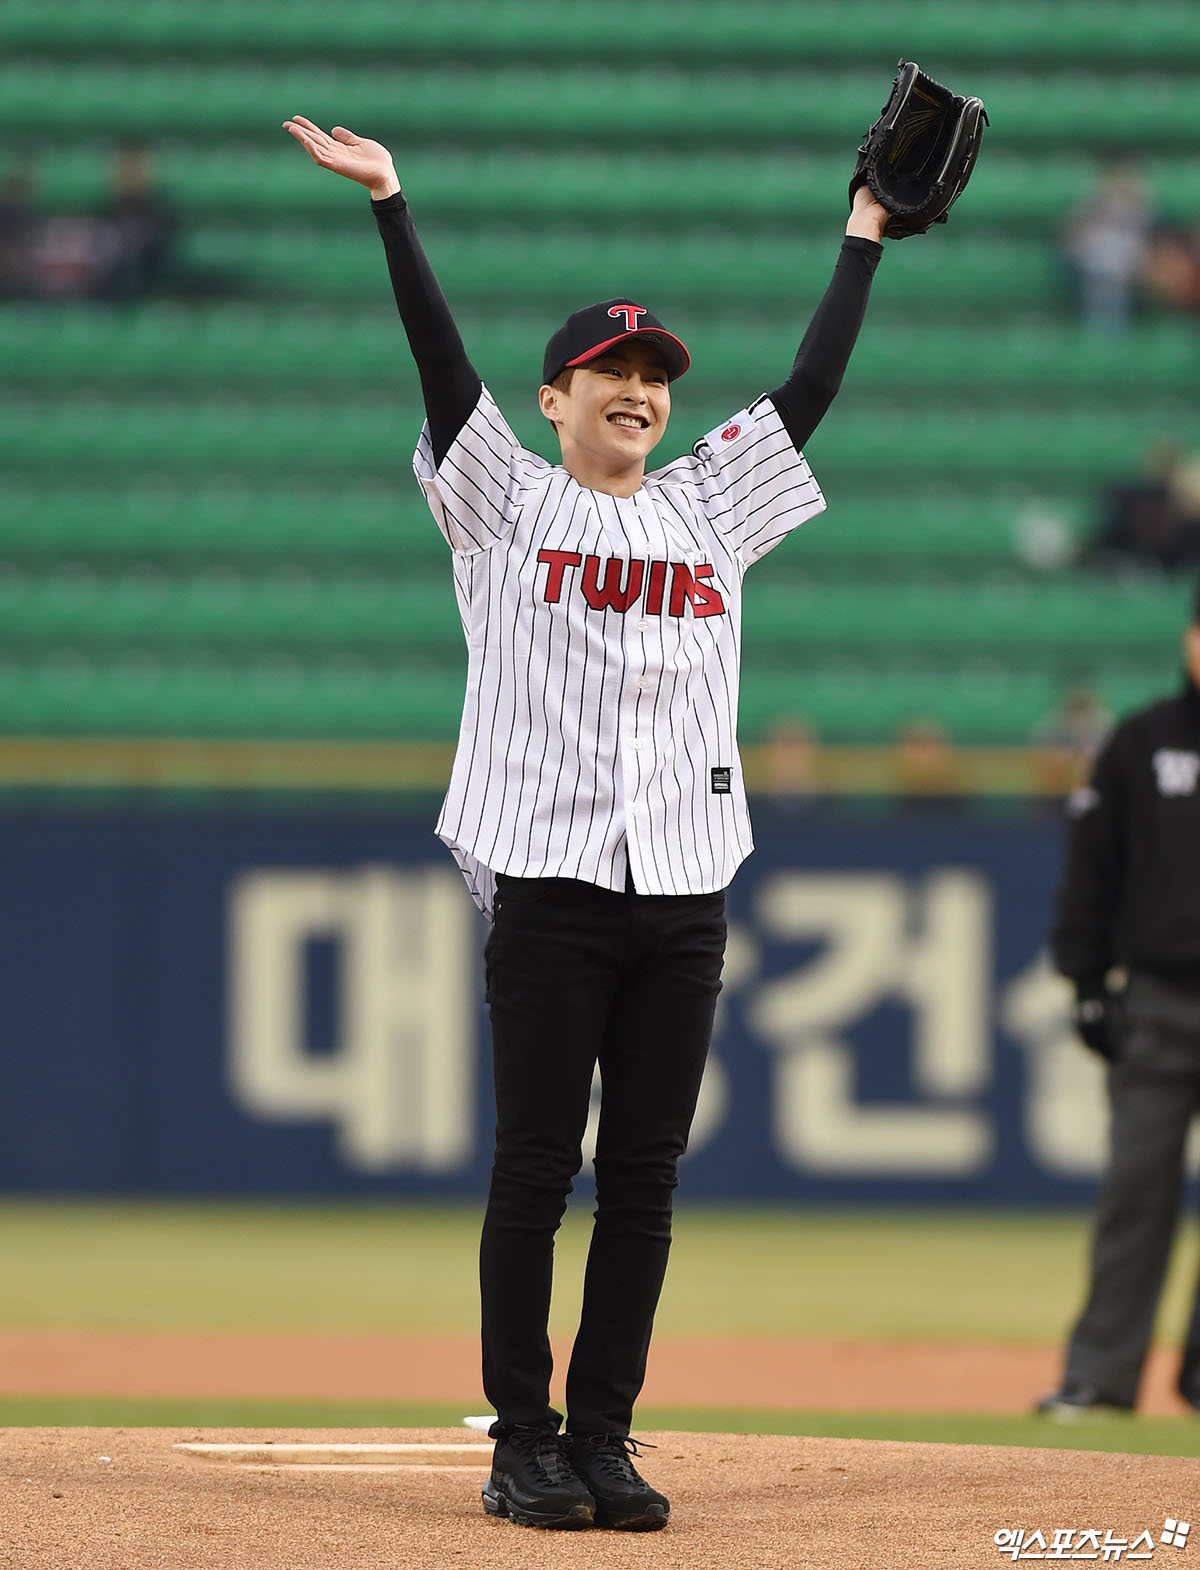 Good to see you.Get off nicely.Uniform number 99.Xiumin, who appeared on a bike in the outfield before the start of Kyonggi, said, I am grateful to be able to use the glorious Kyonggi.The LG Twins are now winning four straight games, and EXO will be the fifth anniversary of this year. I think it would be nice if the LG Twins won five straight games, he said.LG Twins cheer.Pumps tight because of the tension.Sharp eyes.Powerful Windup.Show me the perfect form.Xiumin was on the topic in the summer of 2015, with a cute appearance of shorts and uniform combination and a perfect verse with opposite charm.On this day, we completed the verse fashion with a uniform with 99 numbers such as black jeans and EXO stage costumes in a somewhat chilly weather.Xiumin, who received a verse guidance from LG pitcher Lim Chan-gyu before Kyonggi, smiled brightly after finishing the verse stably.Bright smile after the verse.We should cherish the verse.Baseball Stadium: Chicken.As Xiumin hoped, the LG Twins won their first five consecutive wins with a 4:0 score to the Samsung Lions thanks to starting pitcher Henry Sosas 7.2 innings, four hits, and no score.On the other hand, Xiumin joined Army active duty in May last year and started military service among EXO members first.In October, he took the role of the past in the Army creative musical Return - Promise of the Day and finished the successful musical debut.He is currently faithfully carrying out his defense duties and is set to Discharge in December this year.